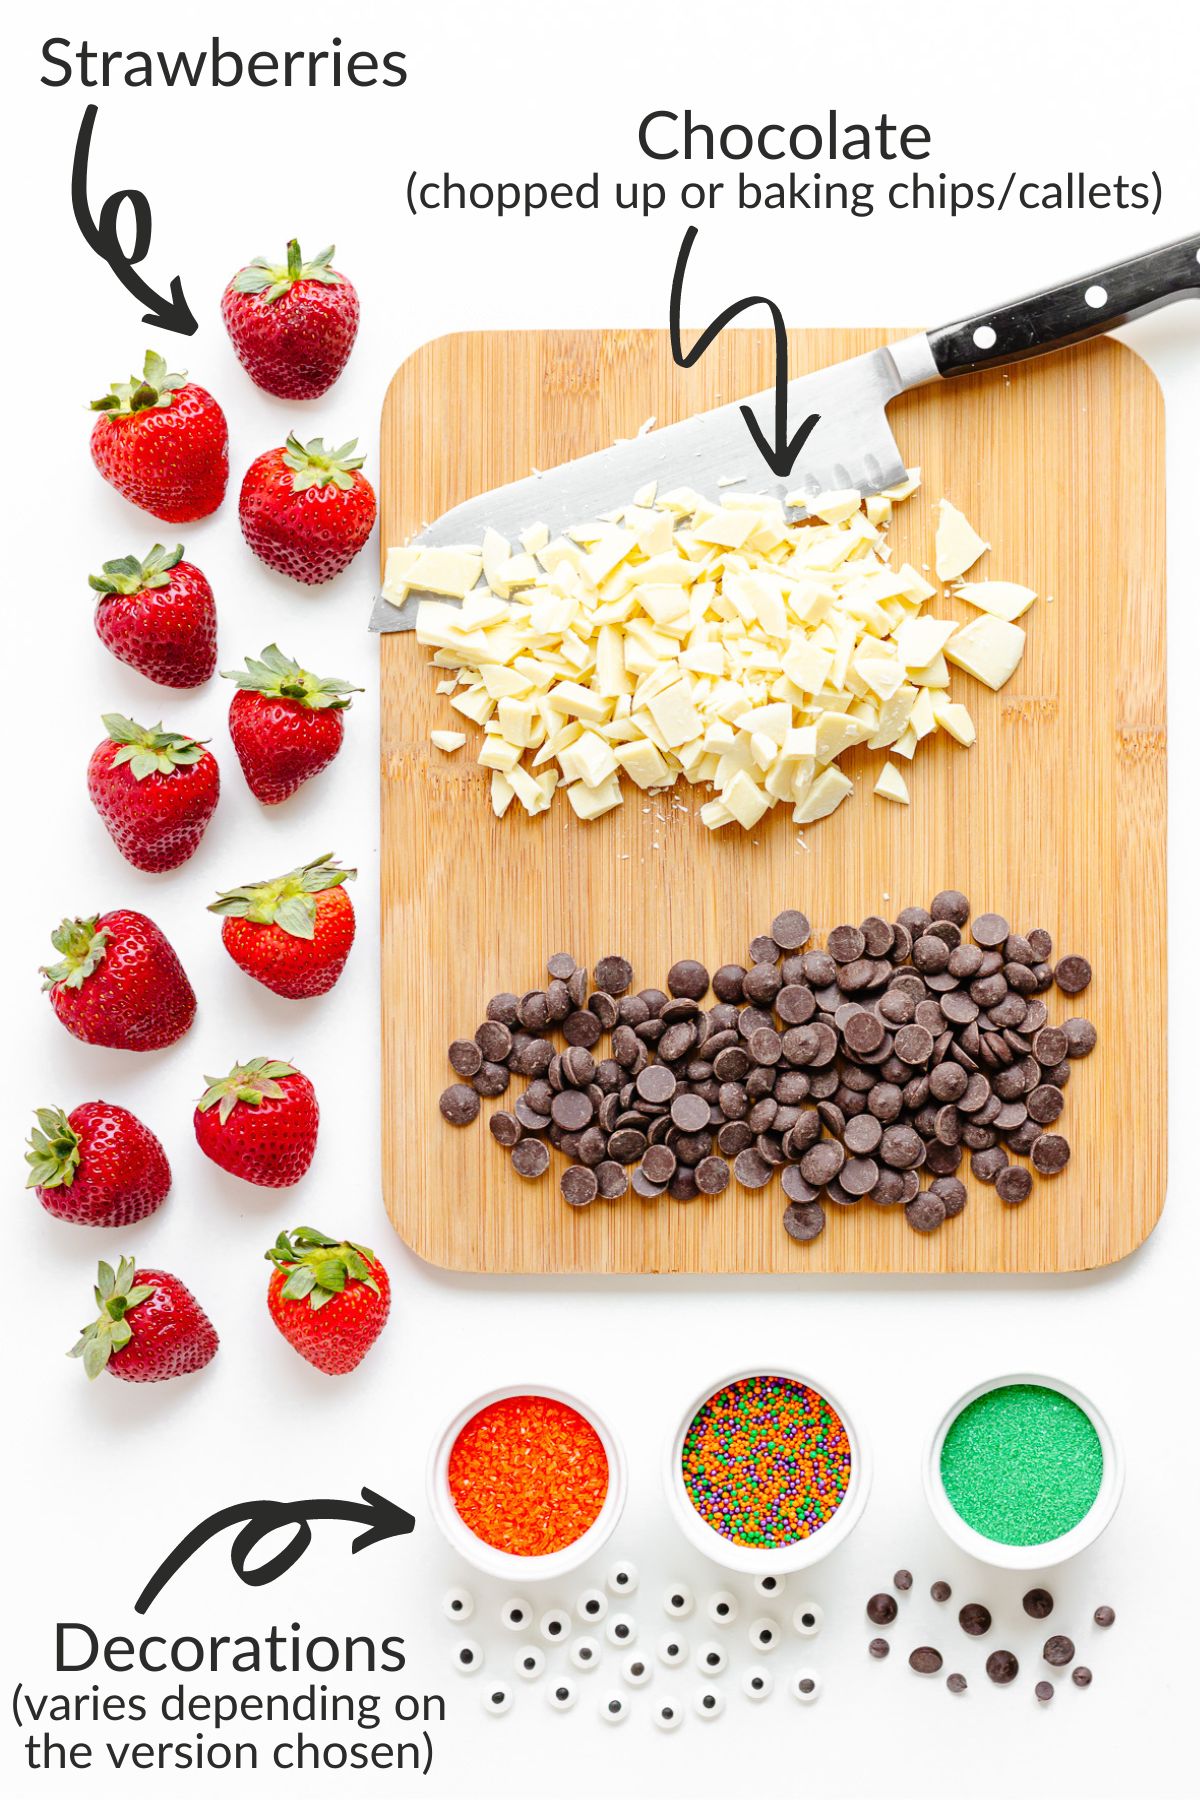 Labelled image of ingredients needed to make Halloween chocolate covered strawberries.